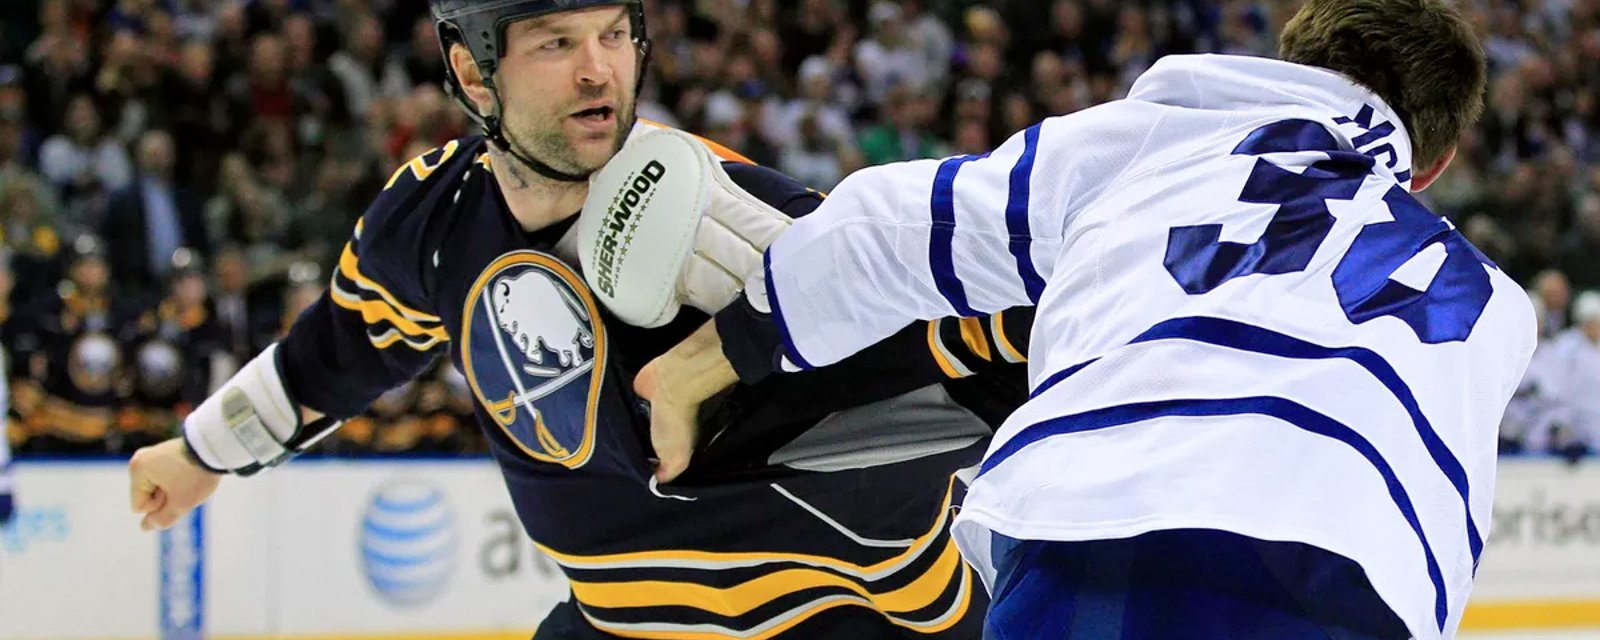 John Scott claims he choked out teammate unconscious in Sabres’ locker room